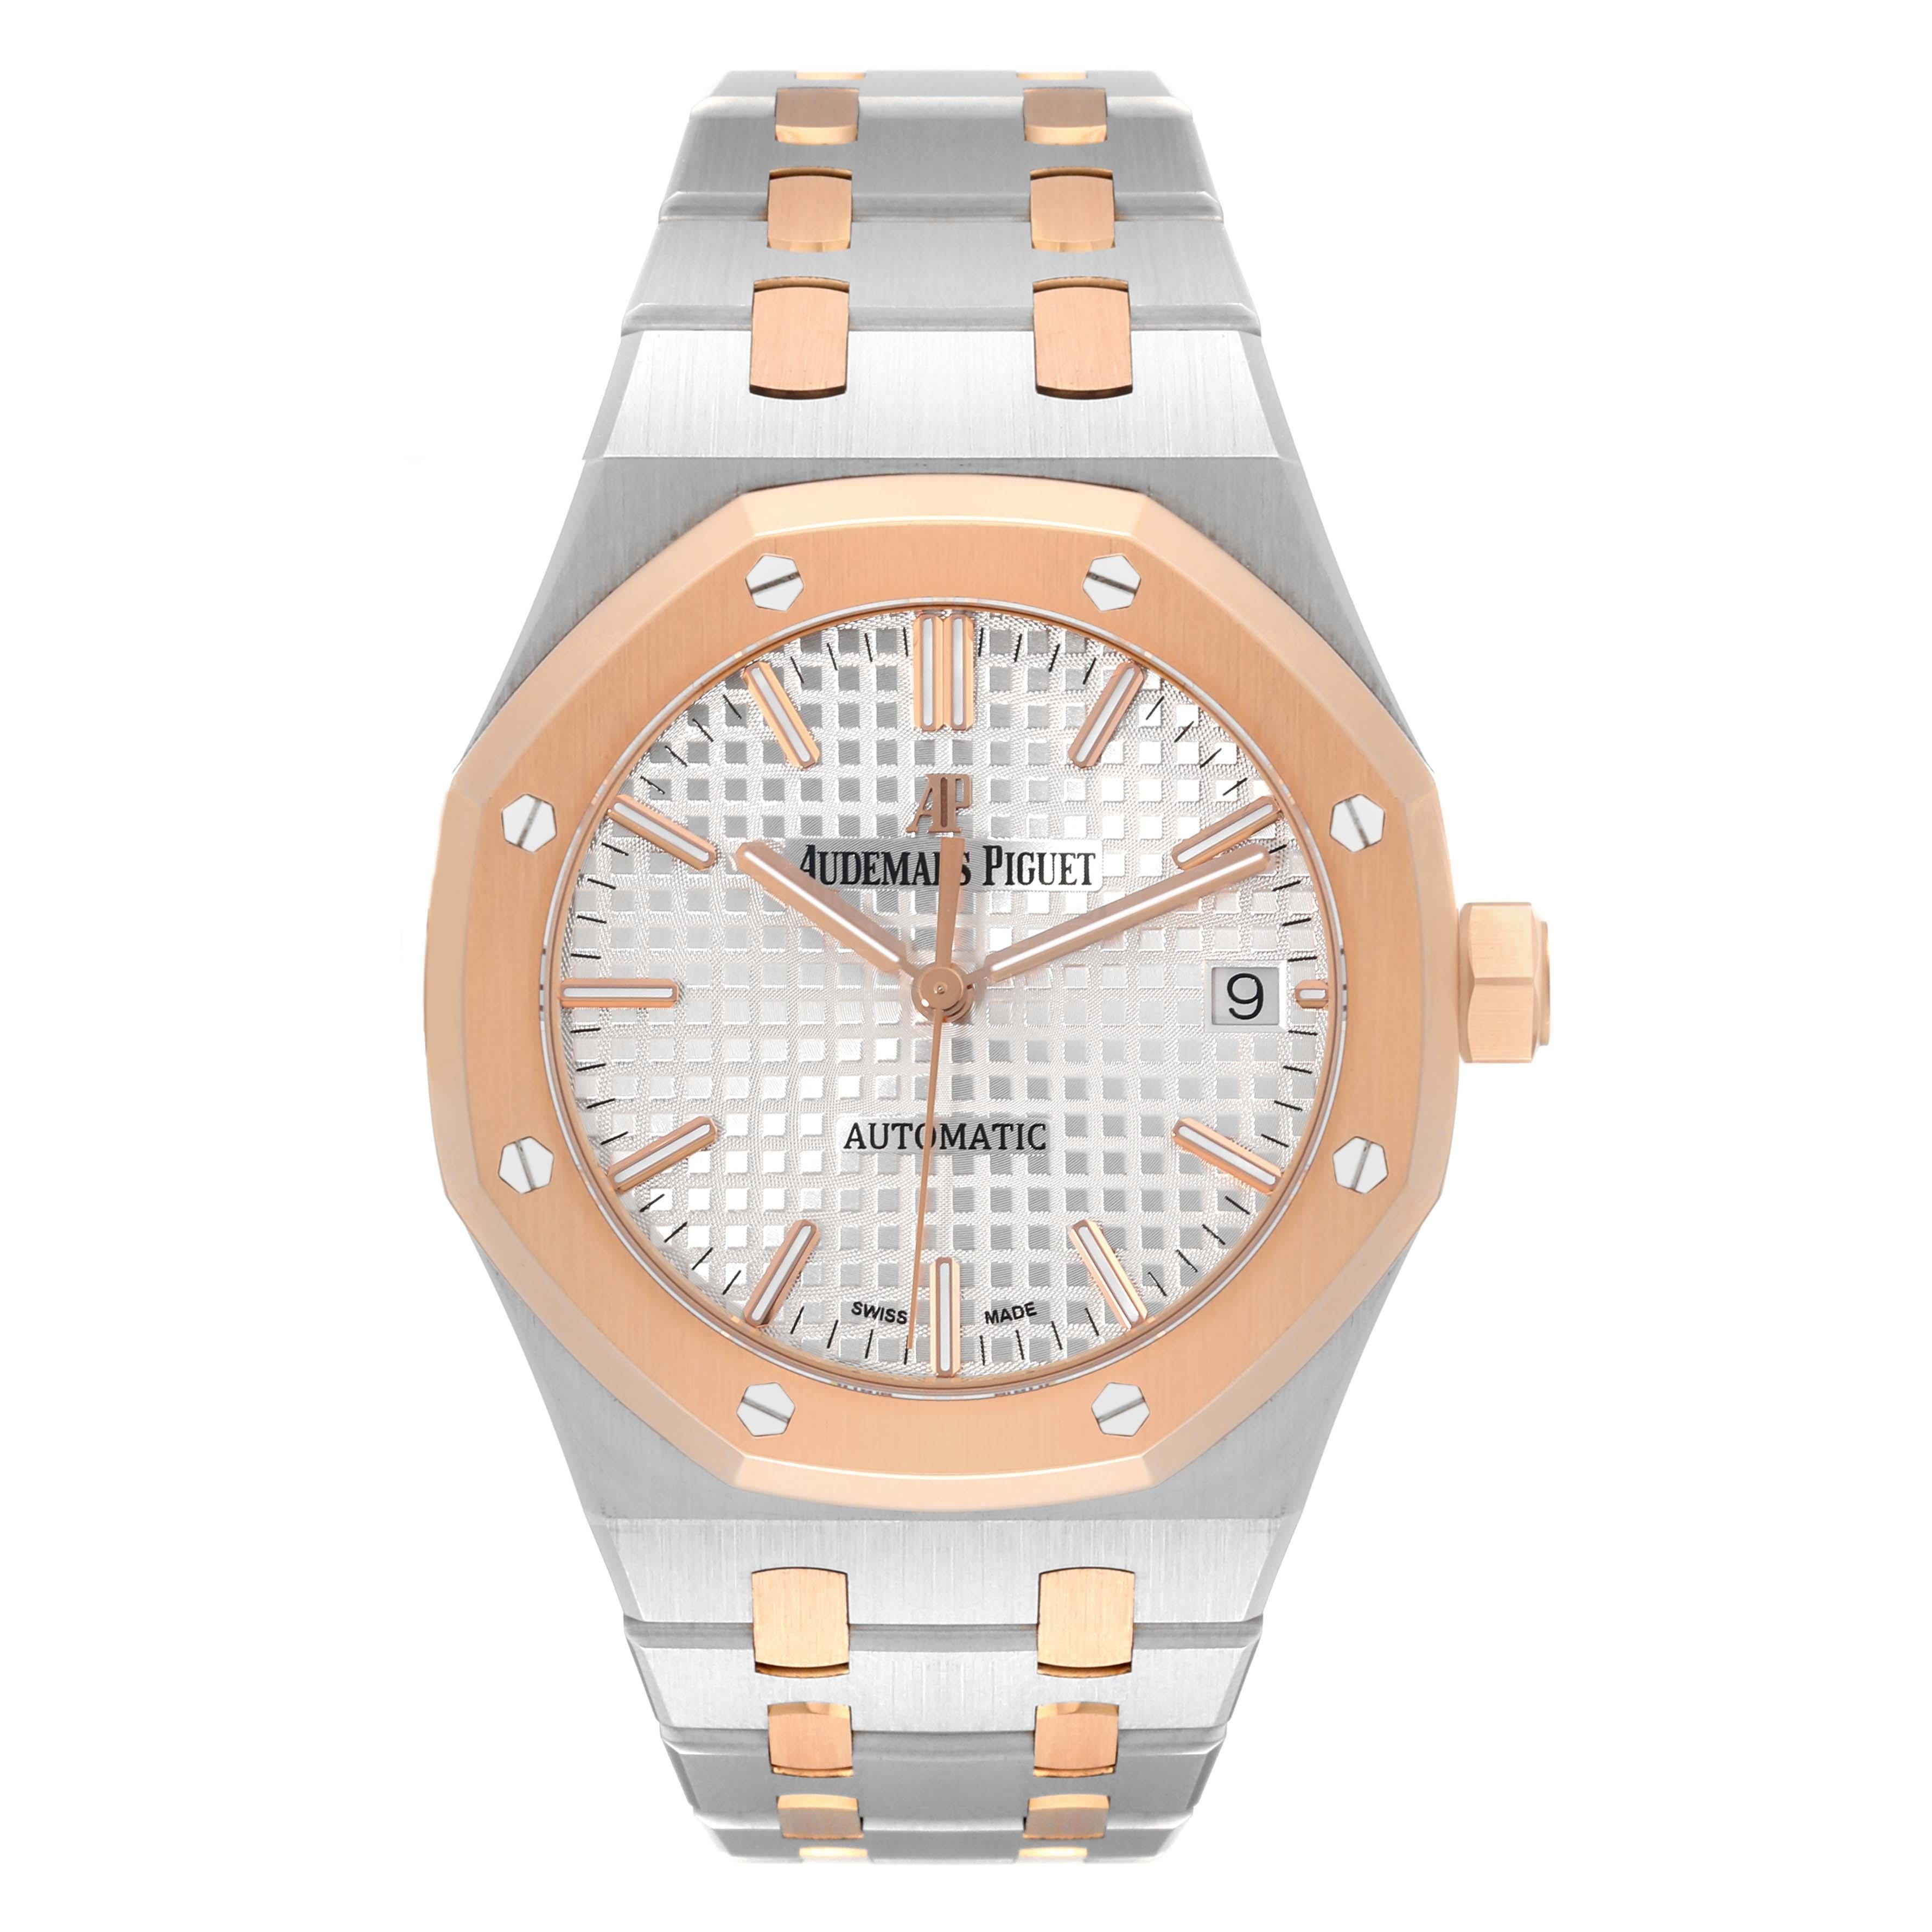 Audemars Piguet Royal Oak Midsize Steel Rose Gold Mens Watch 15450SR Box Card. Automatic self-winding movement. Brushed stainless steel case with polished bevel edges 37.0 mm in diameter. Case thickness 9.80 mm. Exhibition transparent sapphire